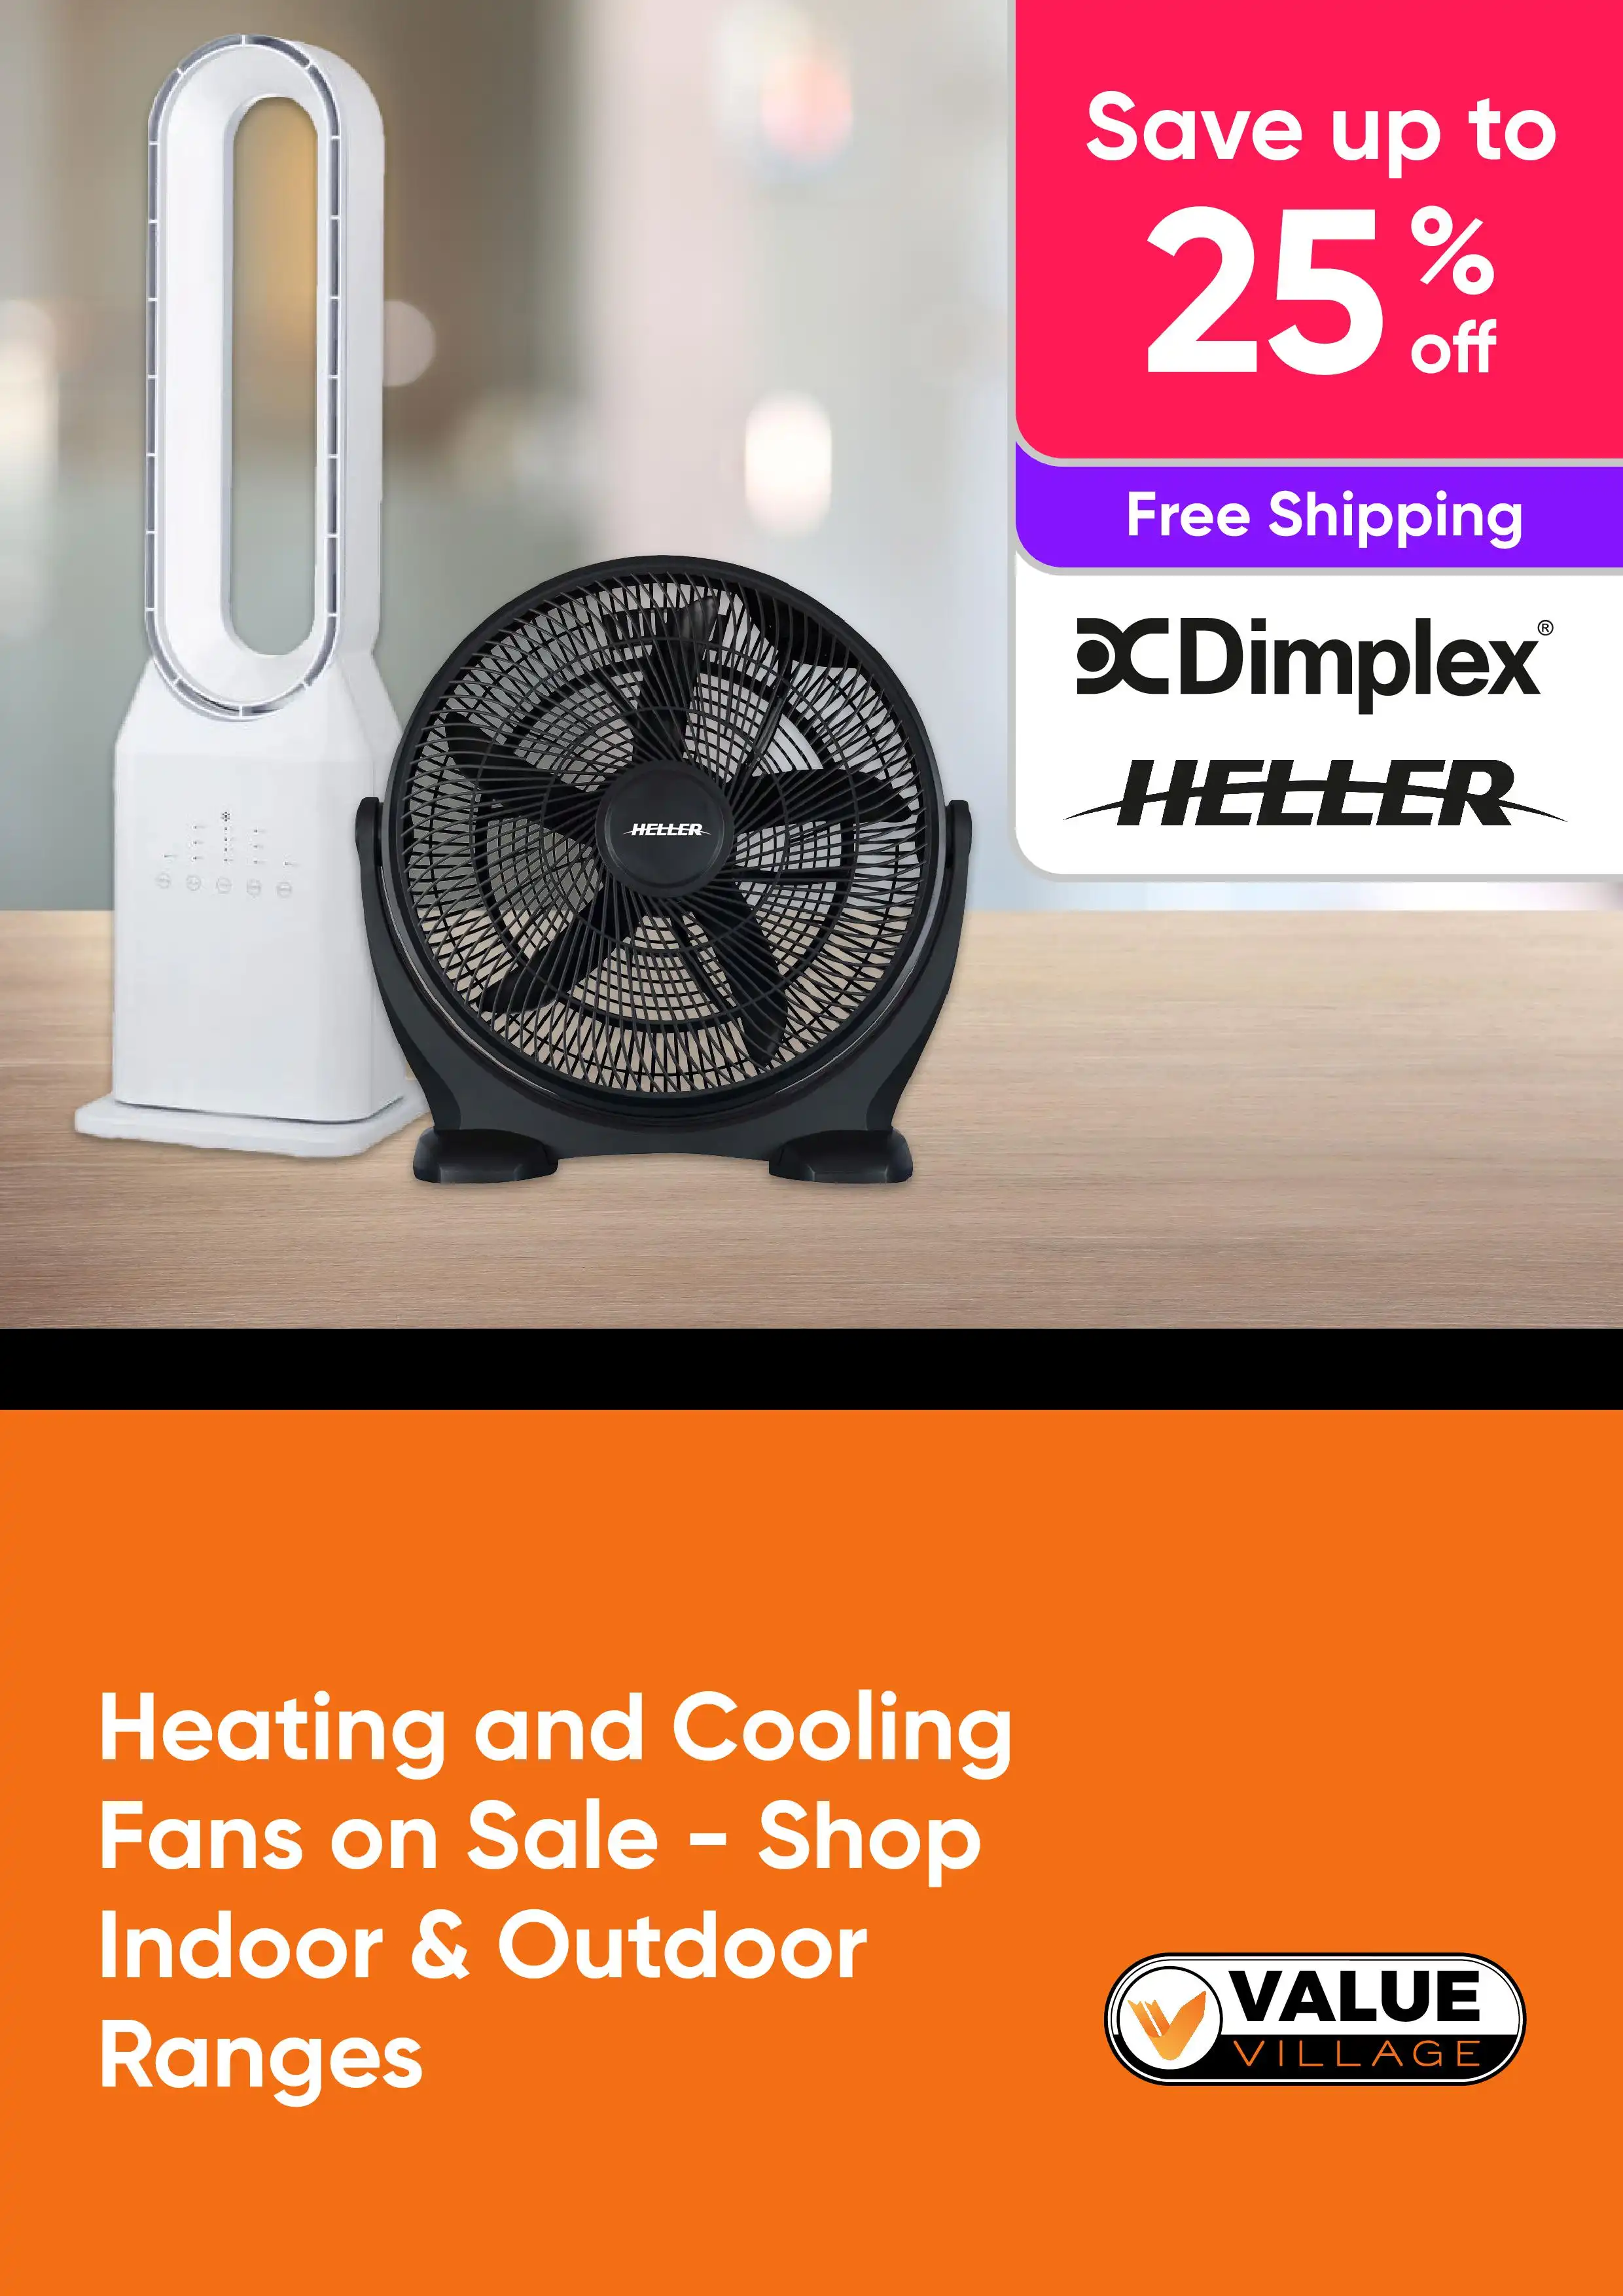 Heating and Cooling Fans on Sale - Shop Indoor & Outdoor Ranges - Dimplex, Heller - Up to 25% Off